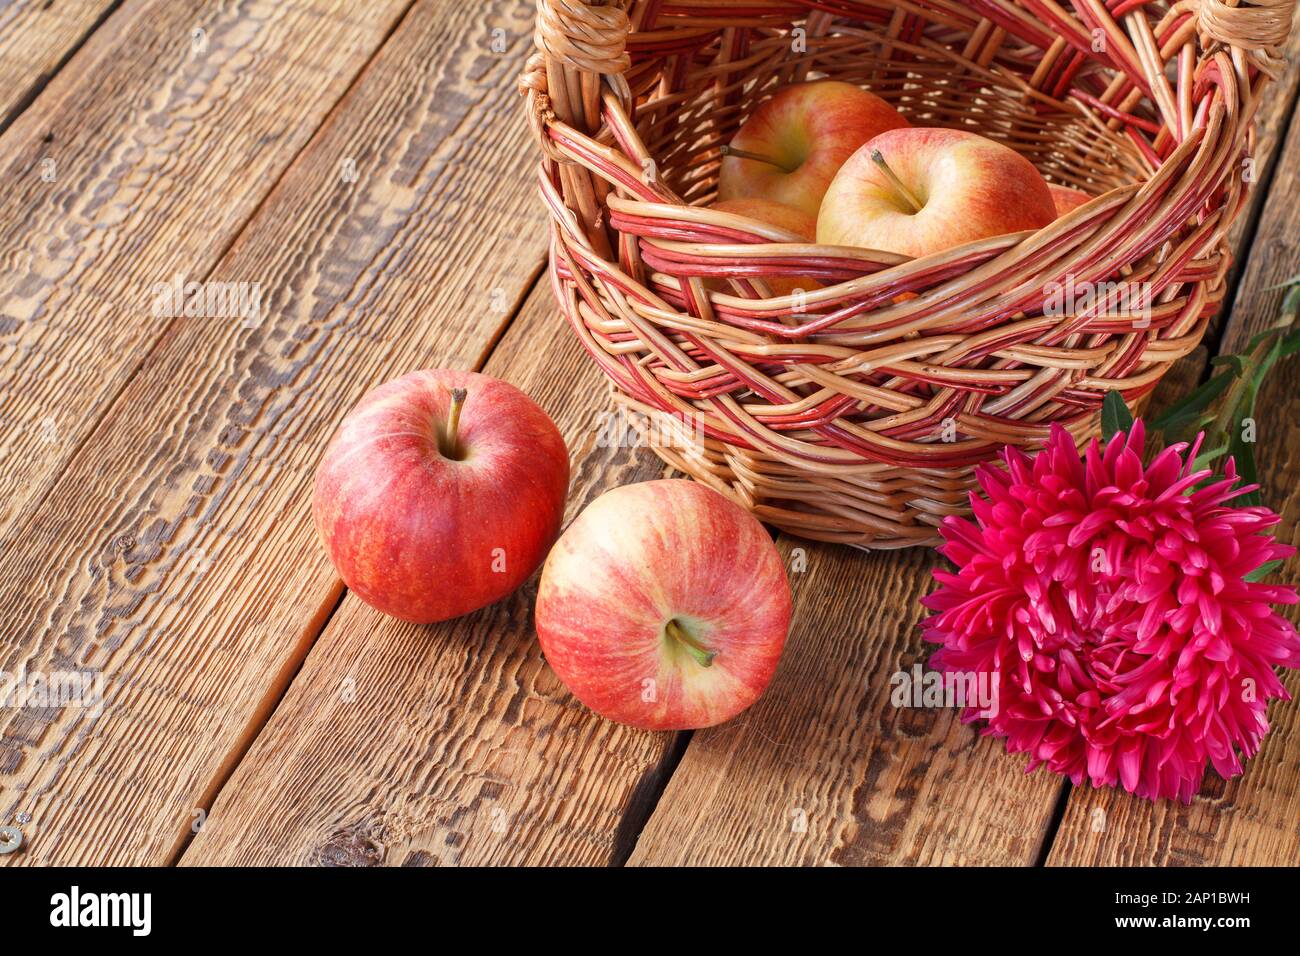 Picked apples in a wicker basket and aster flower on old wooden boards. Just harvested fruits. Top view. Stock Photo